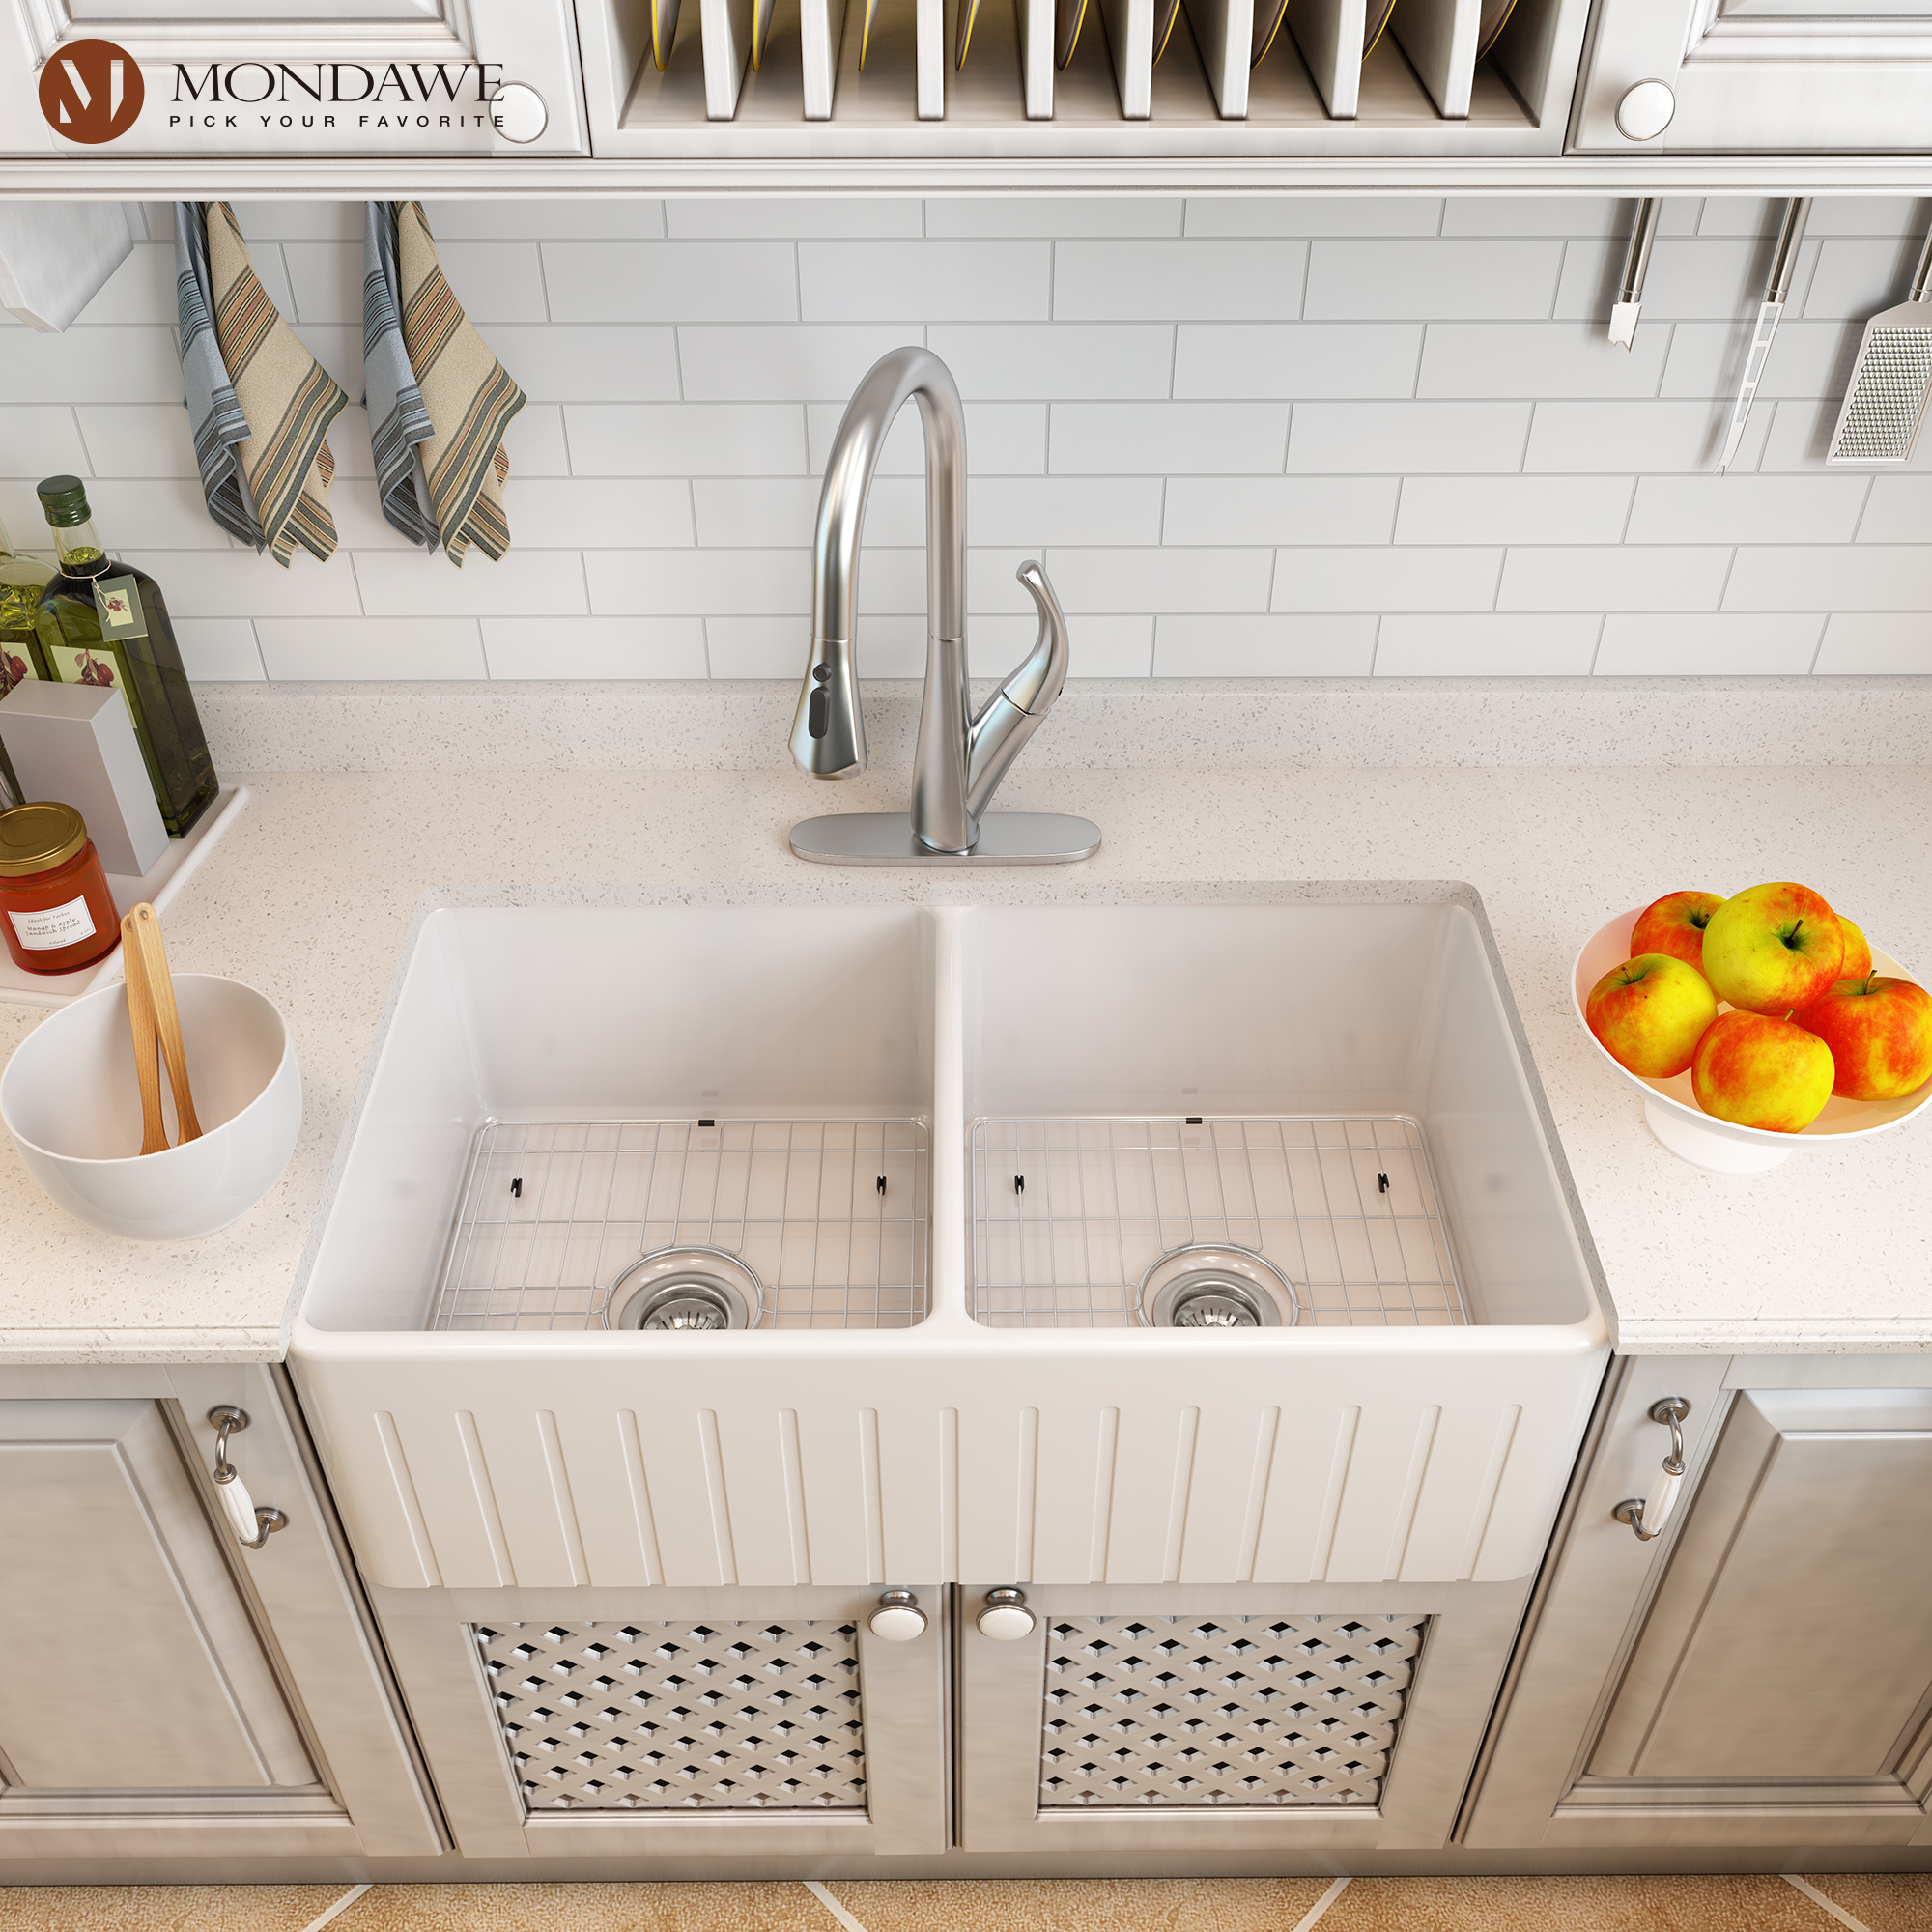 Farmhouse 33 In. Double Bowl Fireclay Kitchen Sink In White Comes With Pull Down Kitchen Faucet-Mondawe